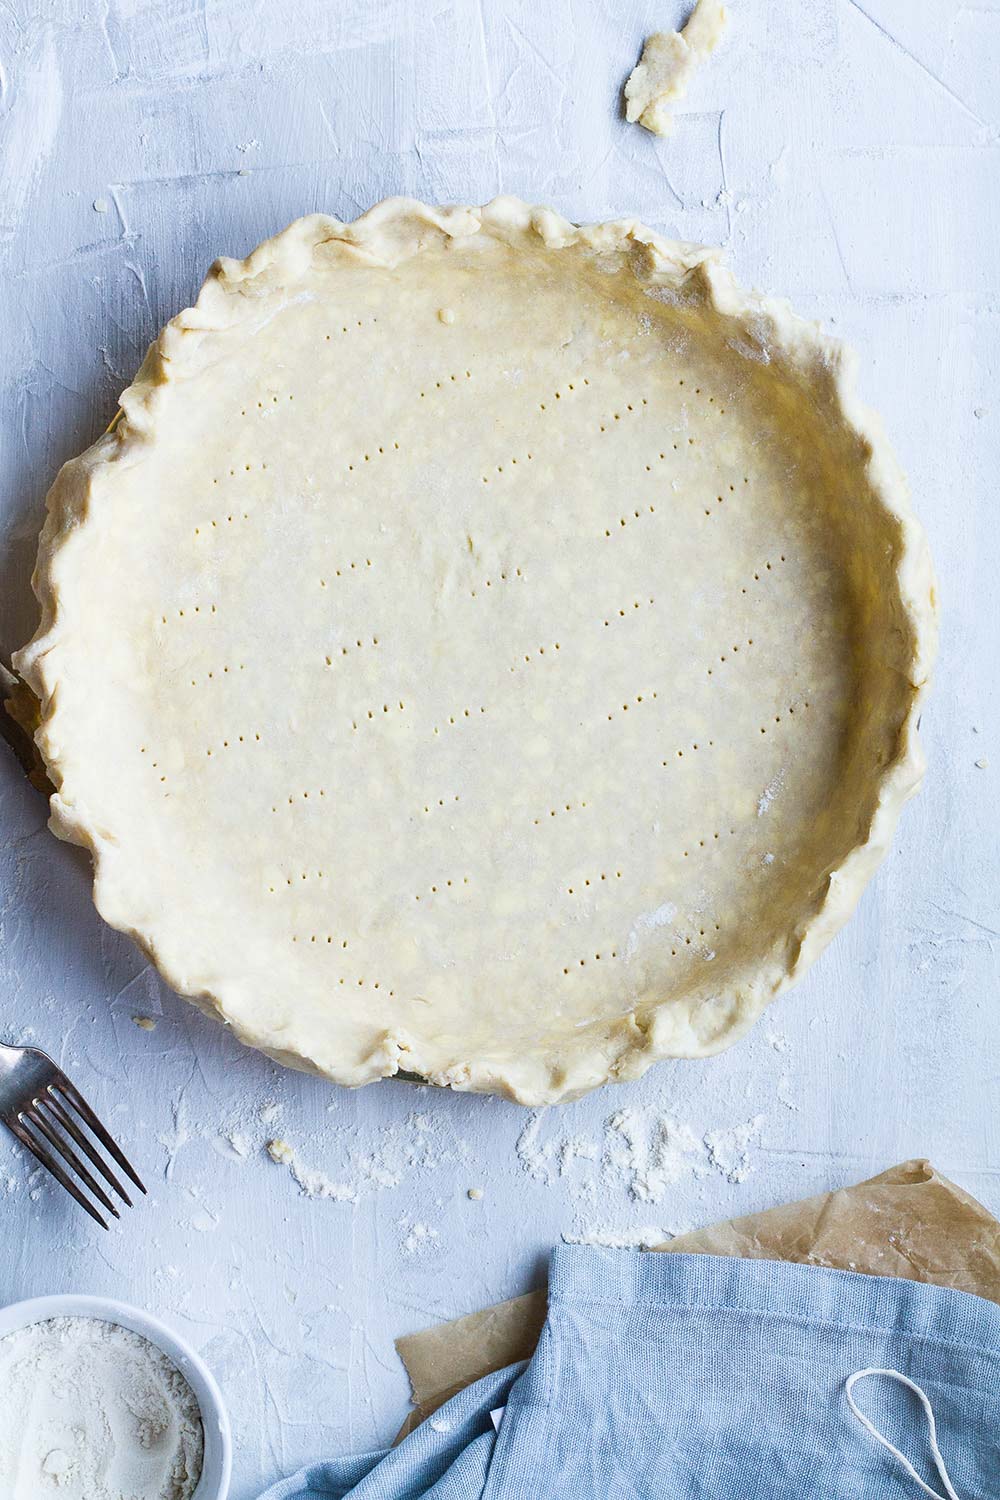 Pie pan filled with an unbaked pie crust.